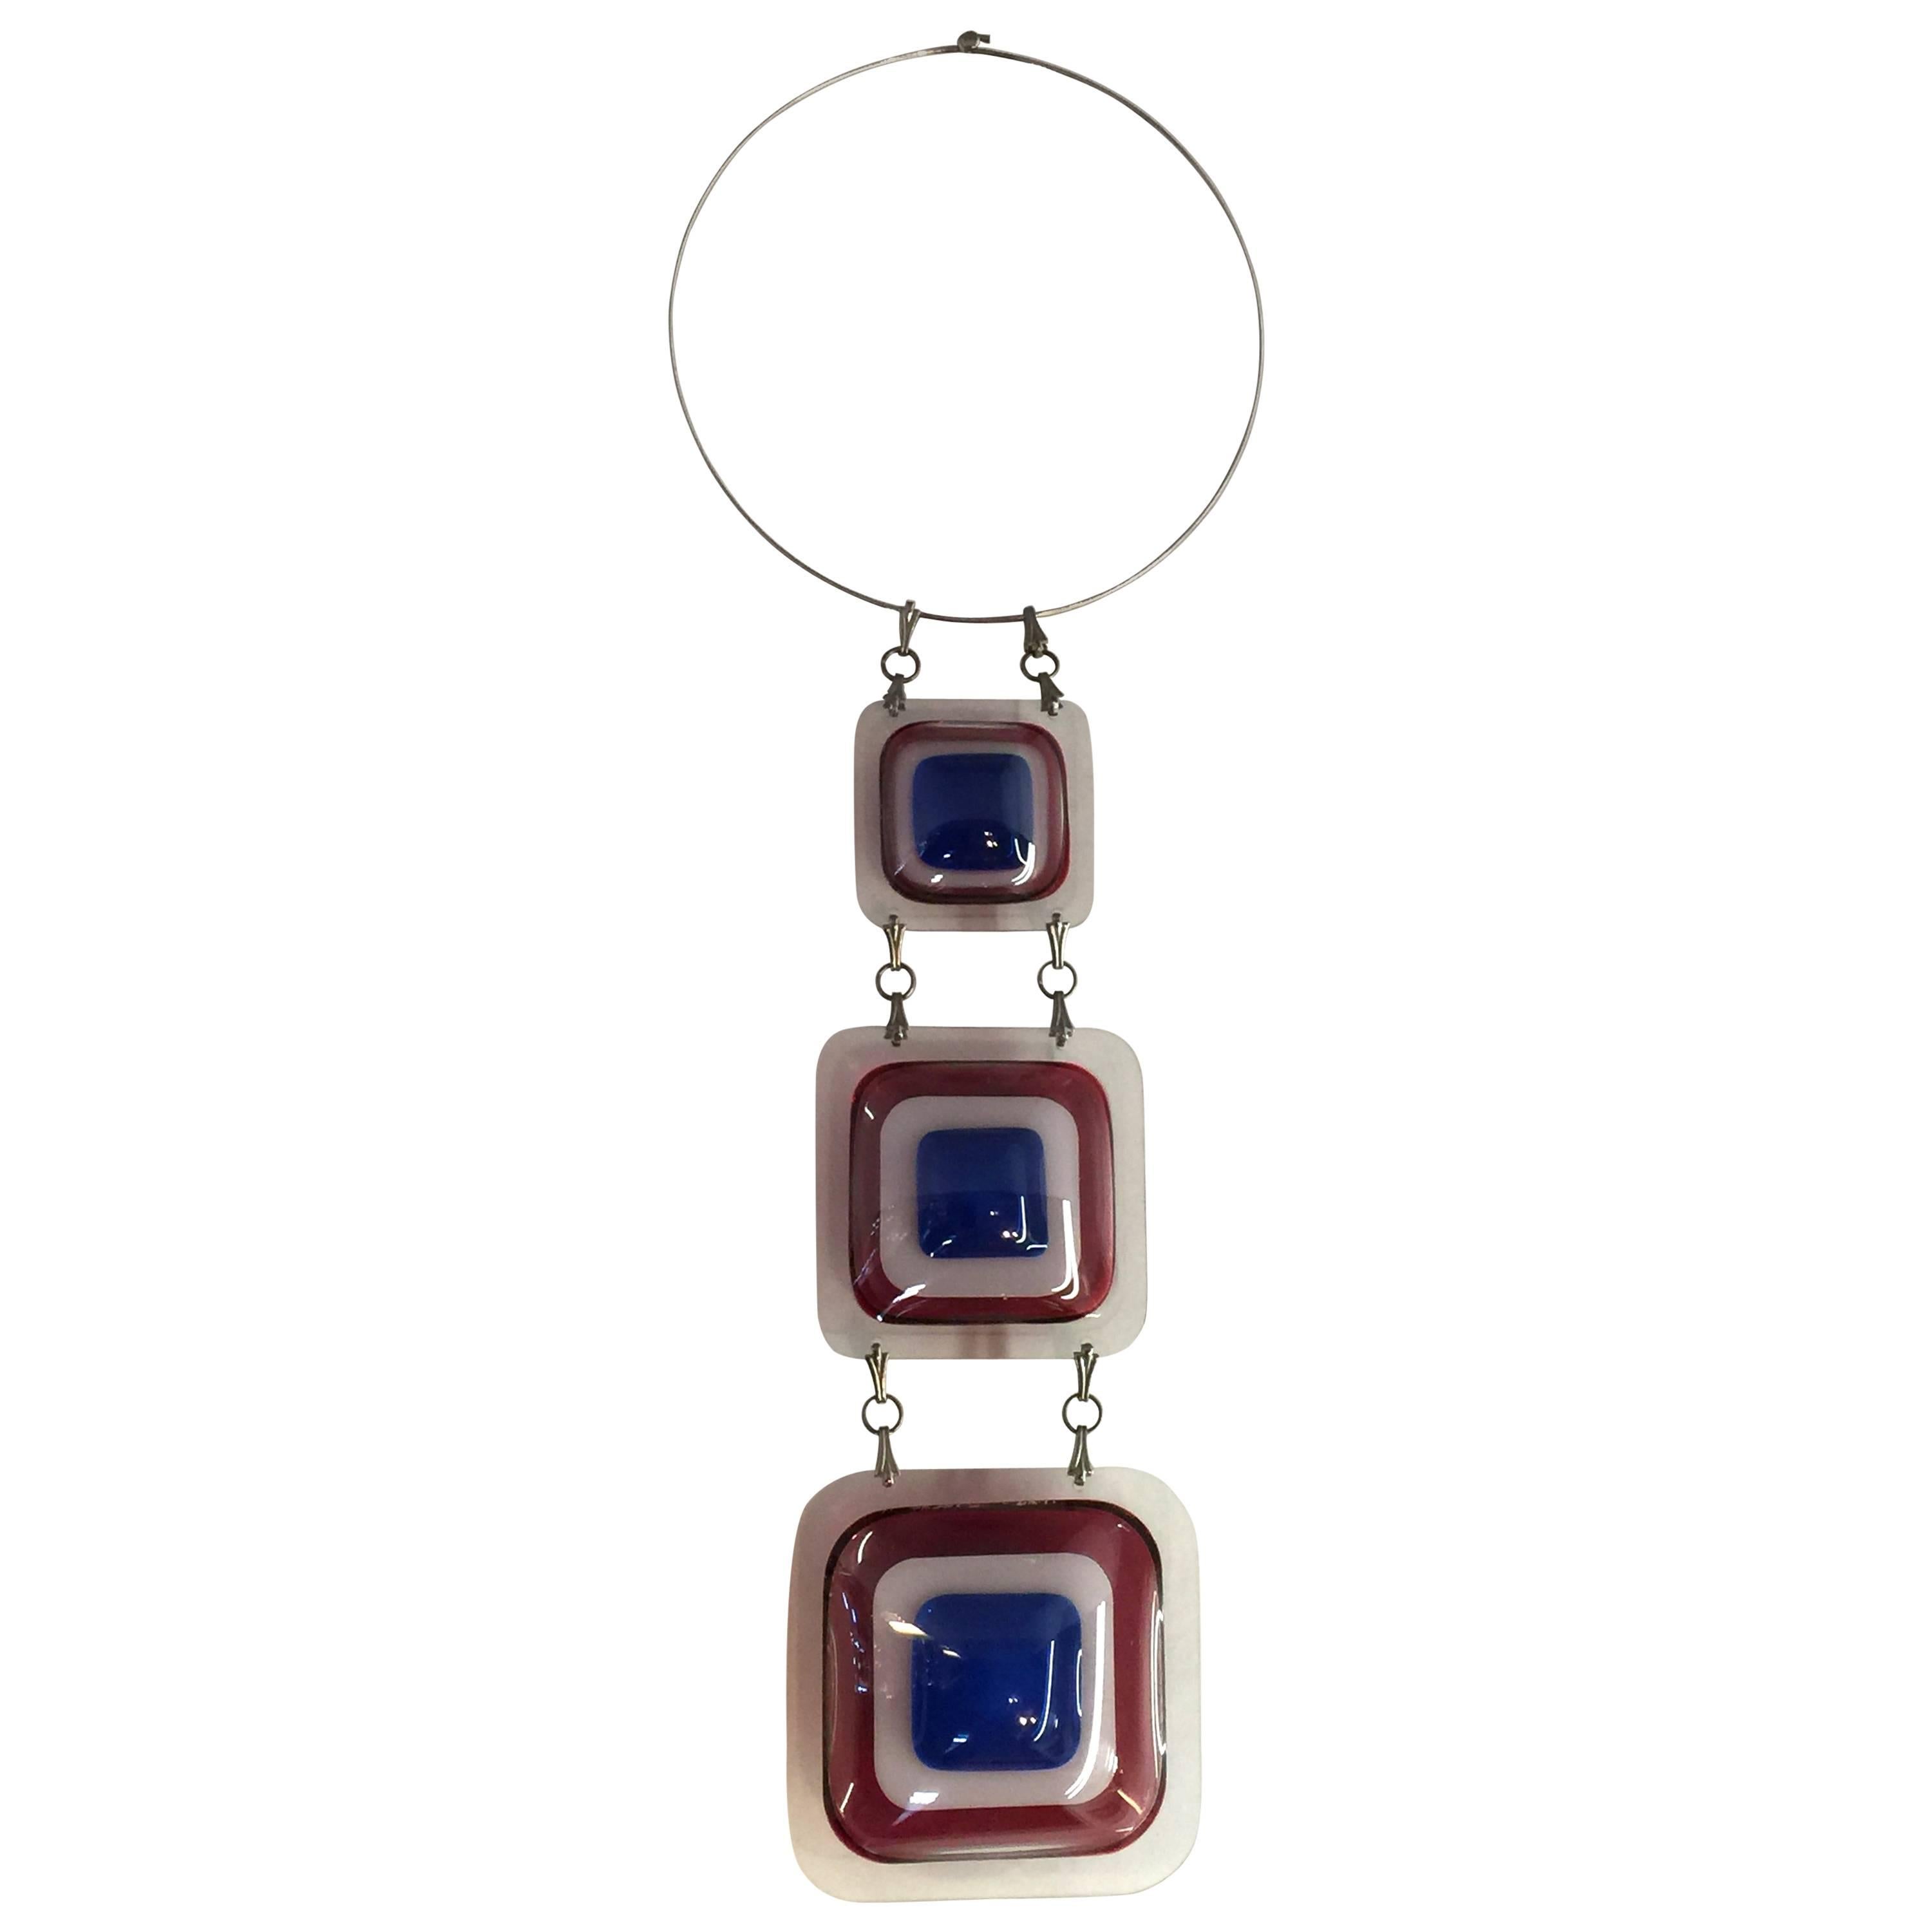 Important Aaronel deRoy Gruber 1971 Fused Acrylic 3tiered Pendant Necklac For Sale